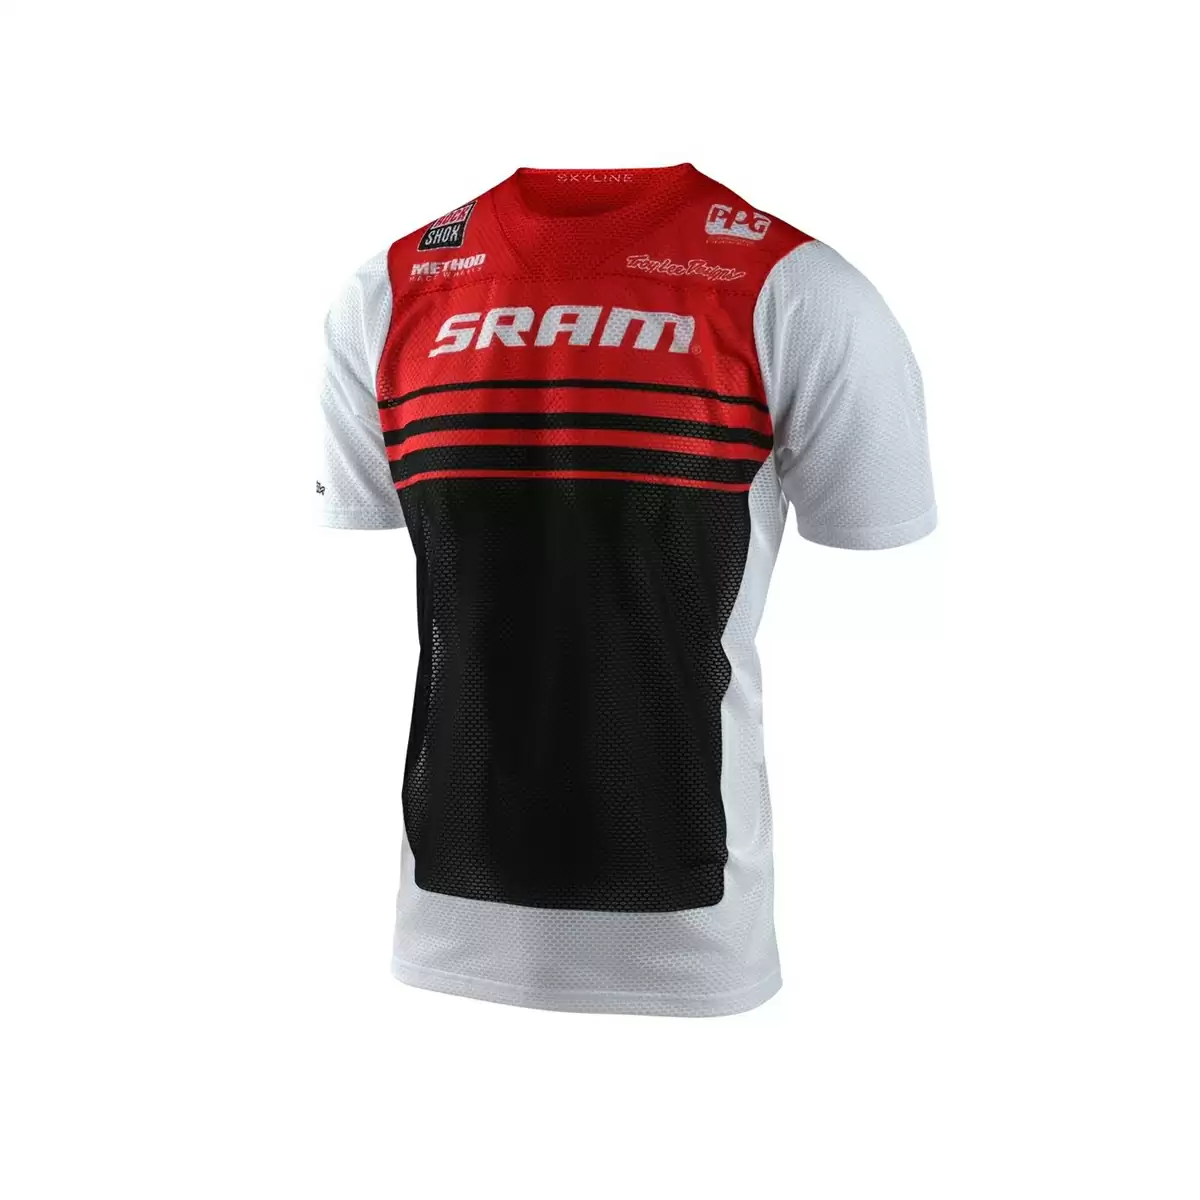 Maillot Skyline Air Sram Manches Courtes Noir/Rouge Taille M - image